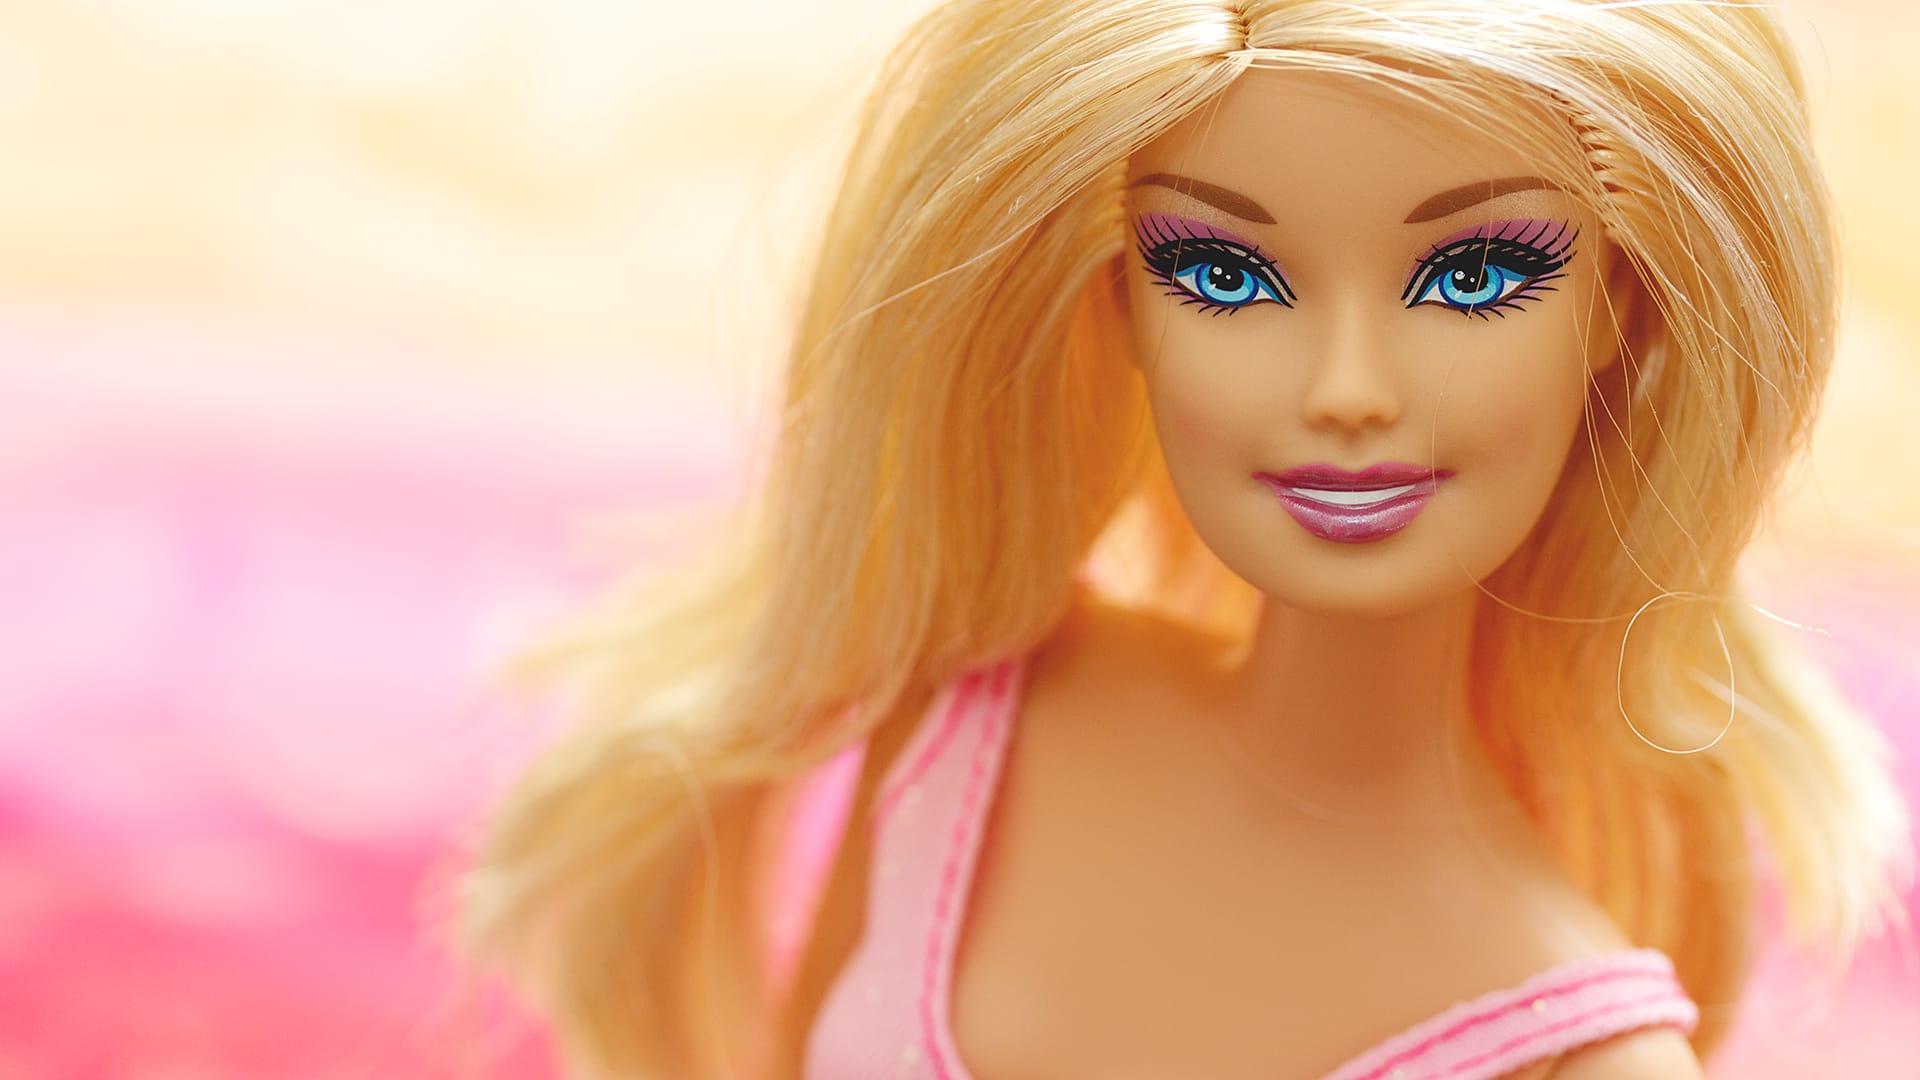 Barbie-branded coding classes are probably going to be counter-productive